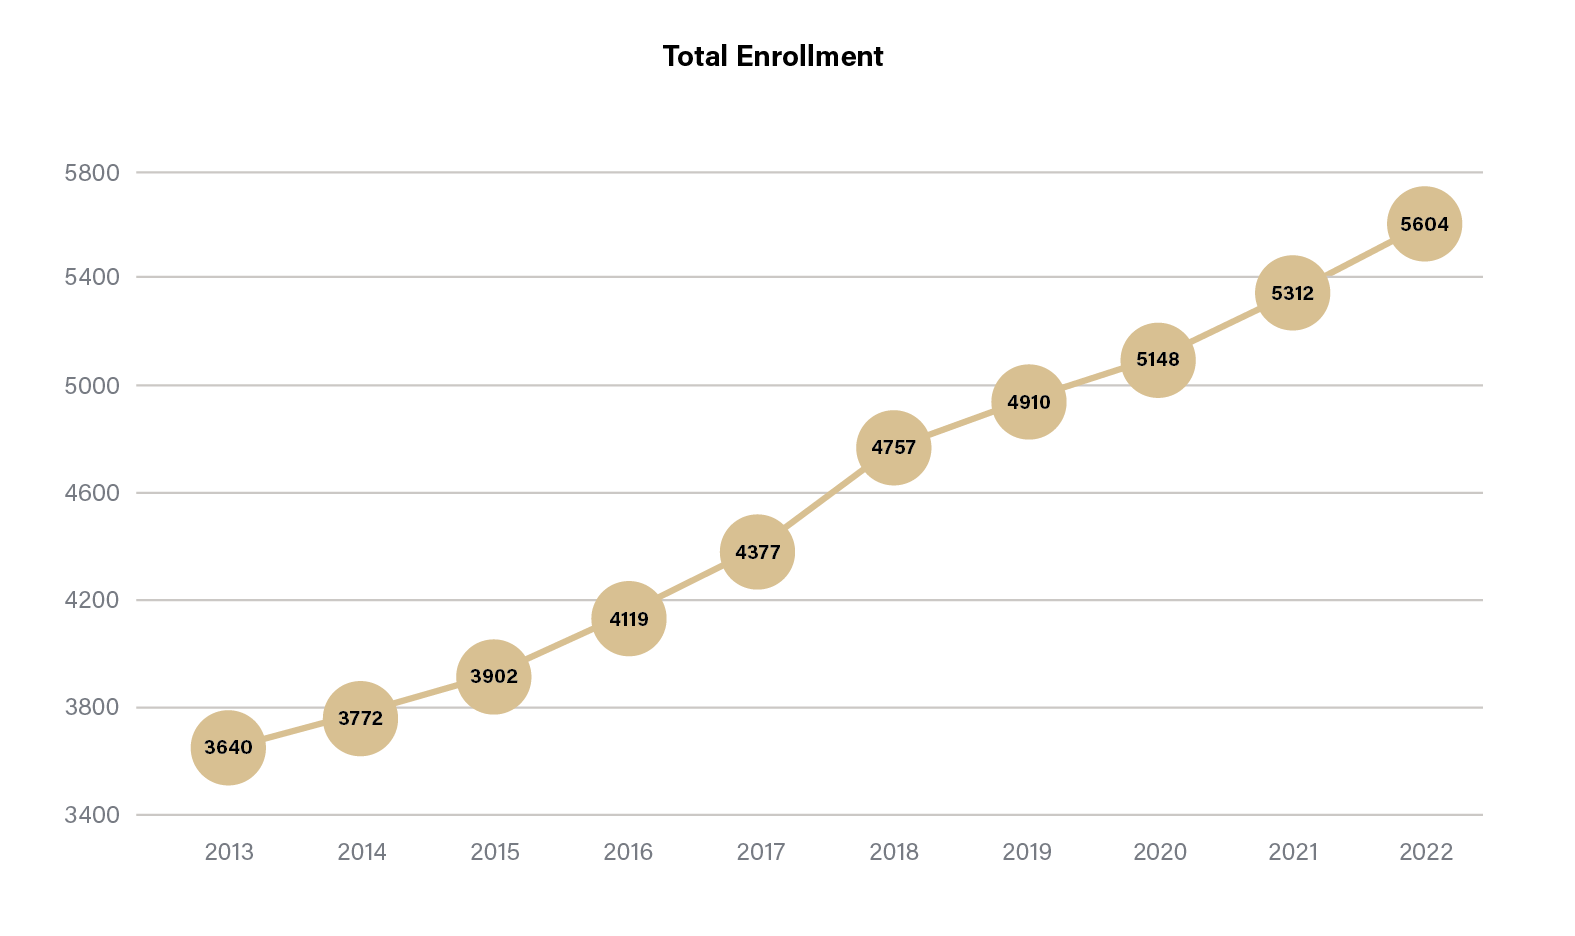 Enrollment totals from 2013 through 2022